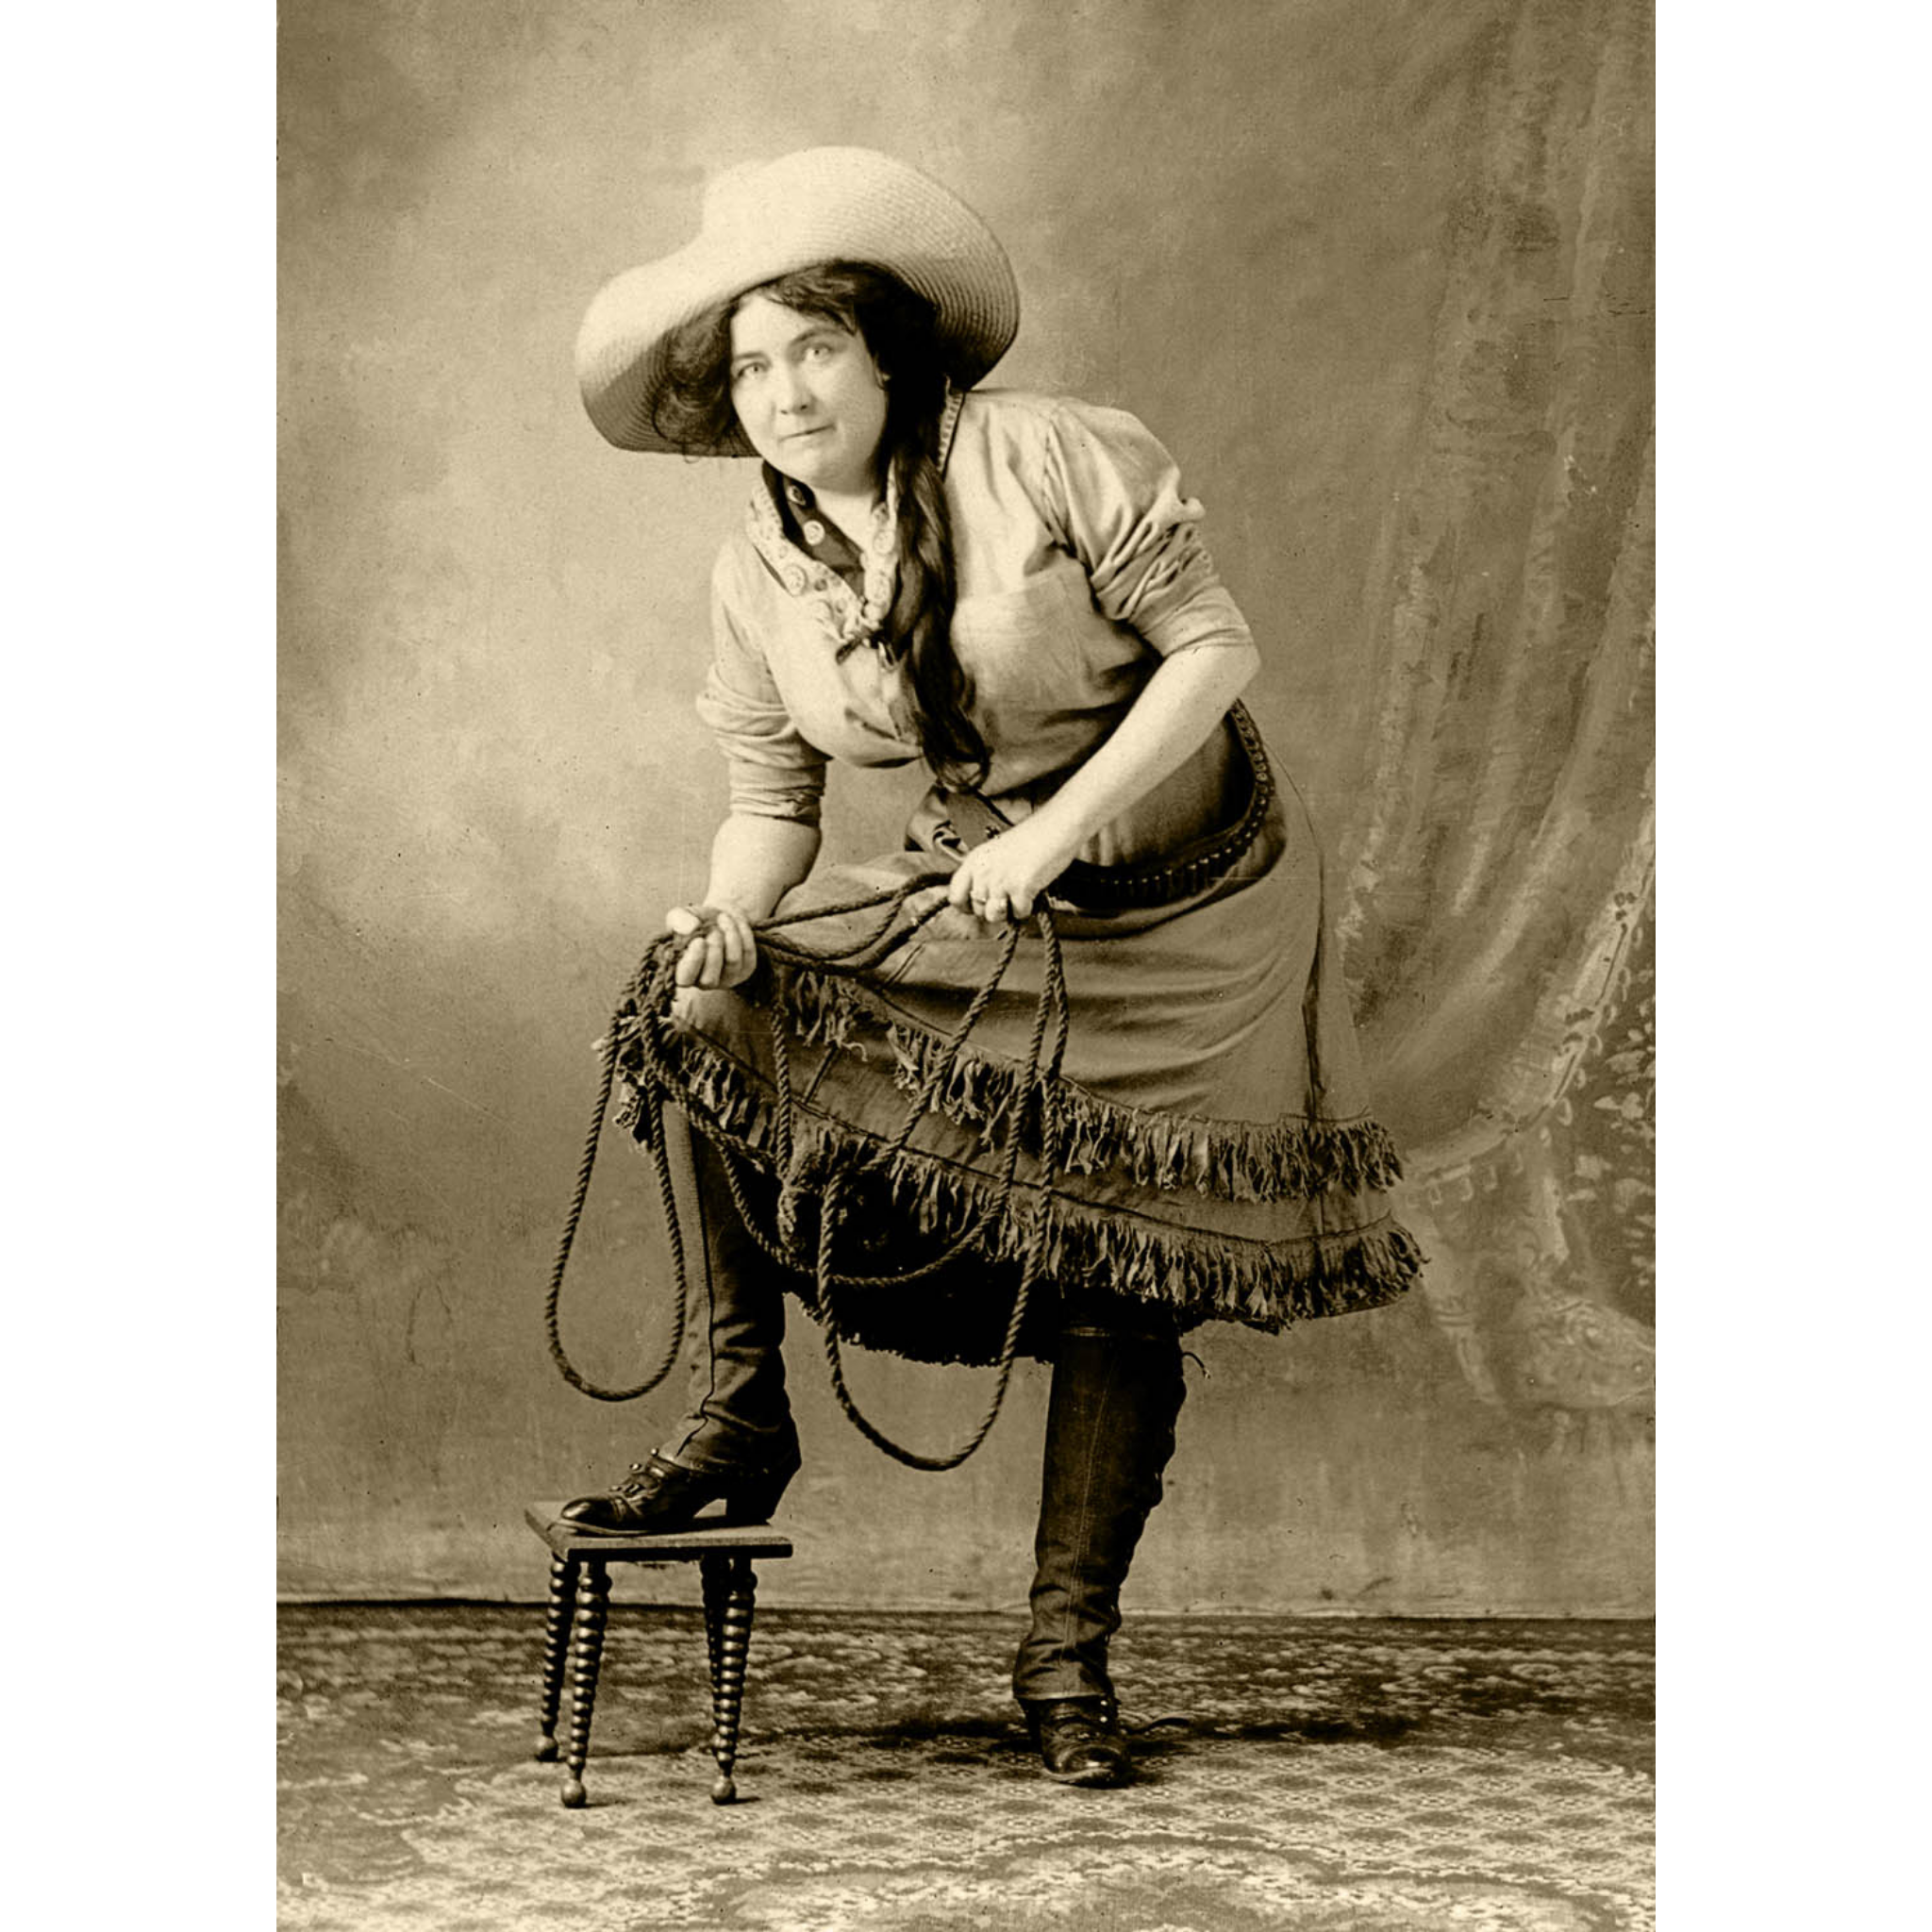 Cowgirl foot on Stool Holding Rope - ca. 1915 Photograph